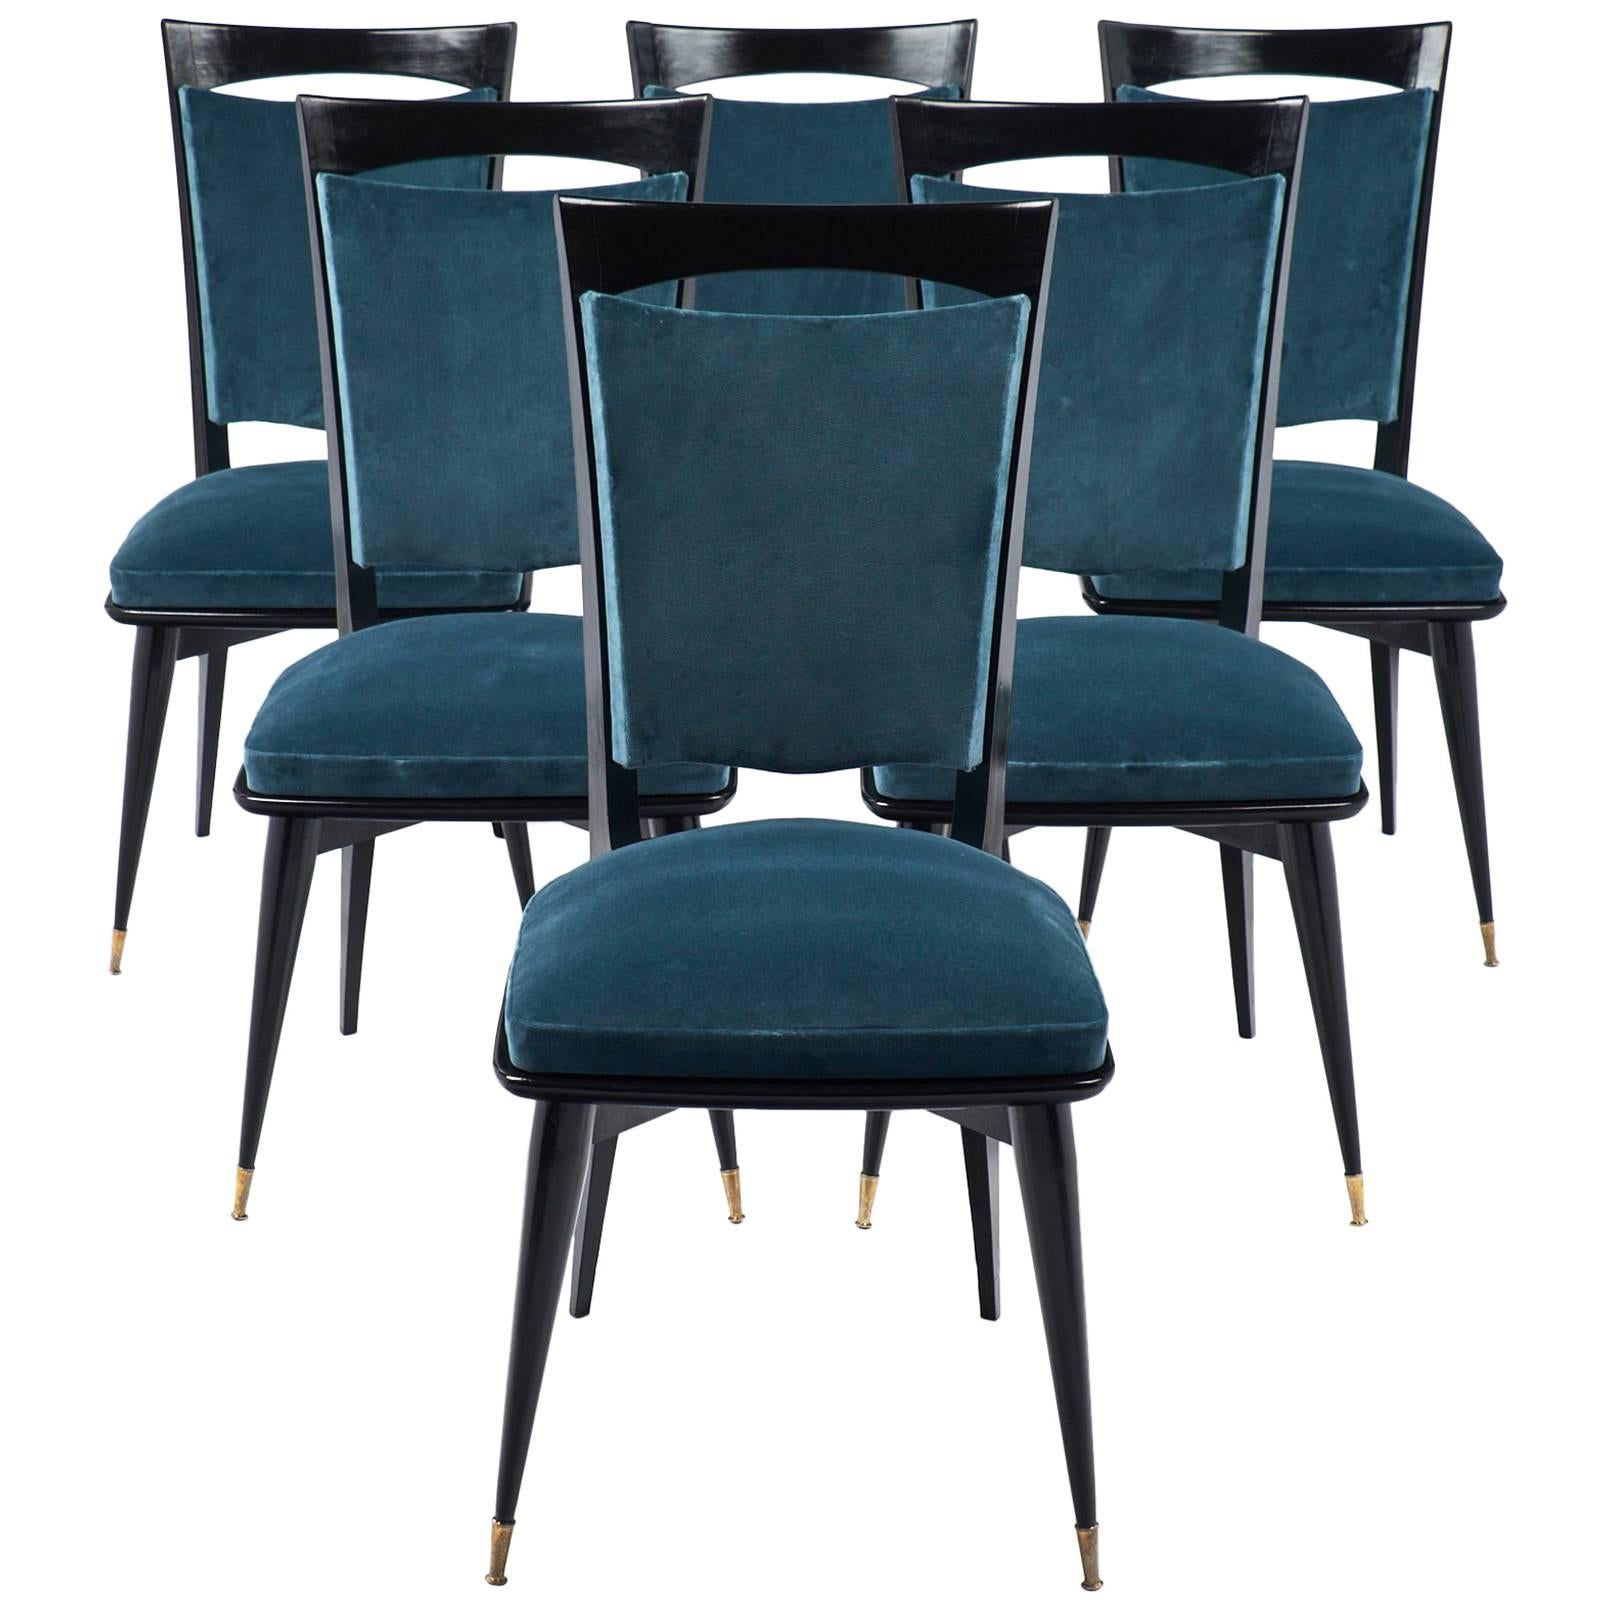 Mid-Century Modern Period Set of Six Teal Velvet Dining Chairs